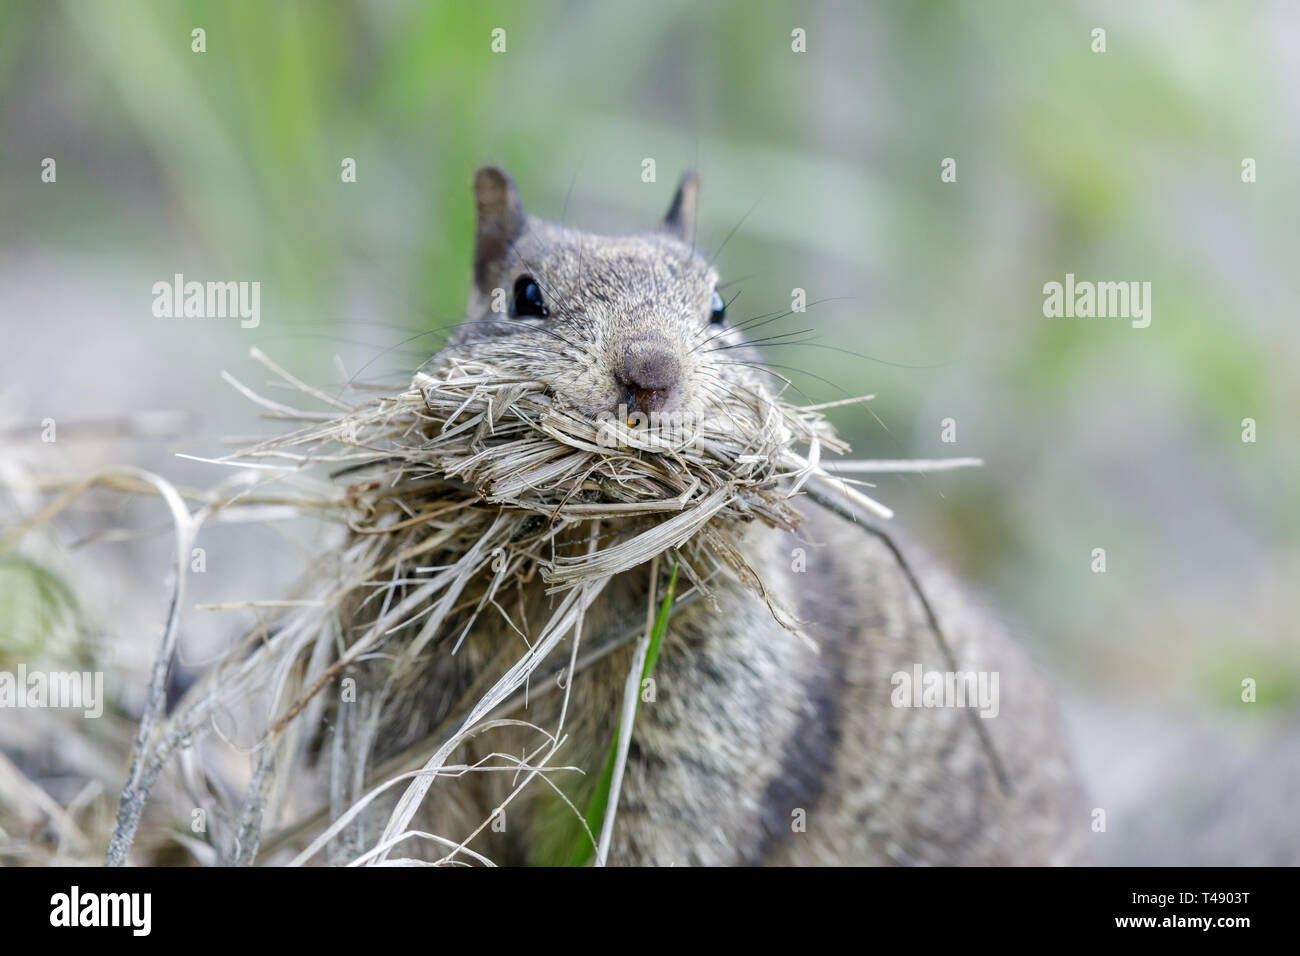 Mouthful California Ground Squirrel (Otospermophilus beecheyi) collecting nest material. Stock Photo